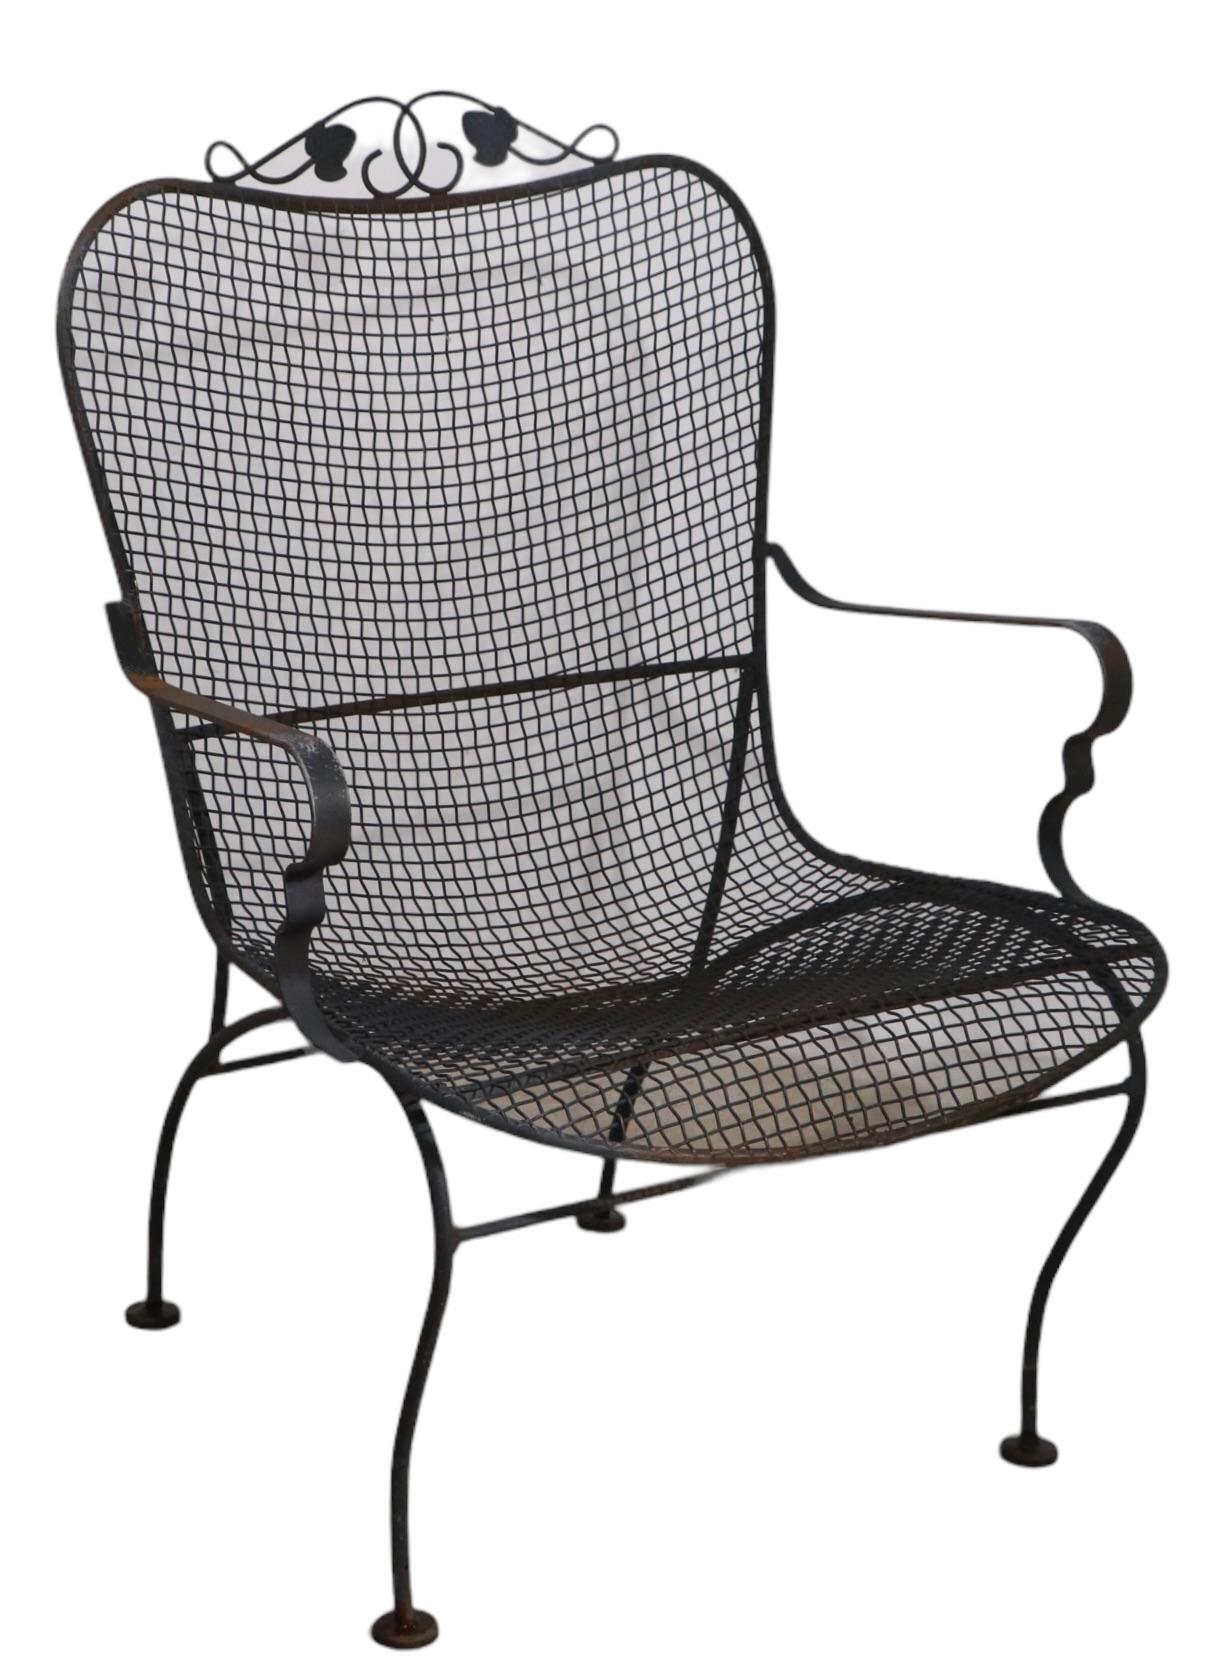 Set of Four Garden, Patio, Poolside Chairs by Woodard For Sale 13